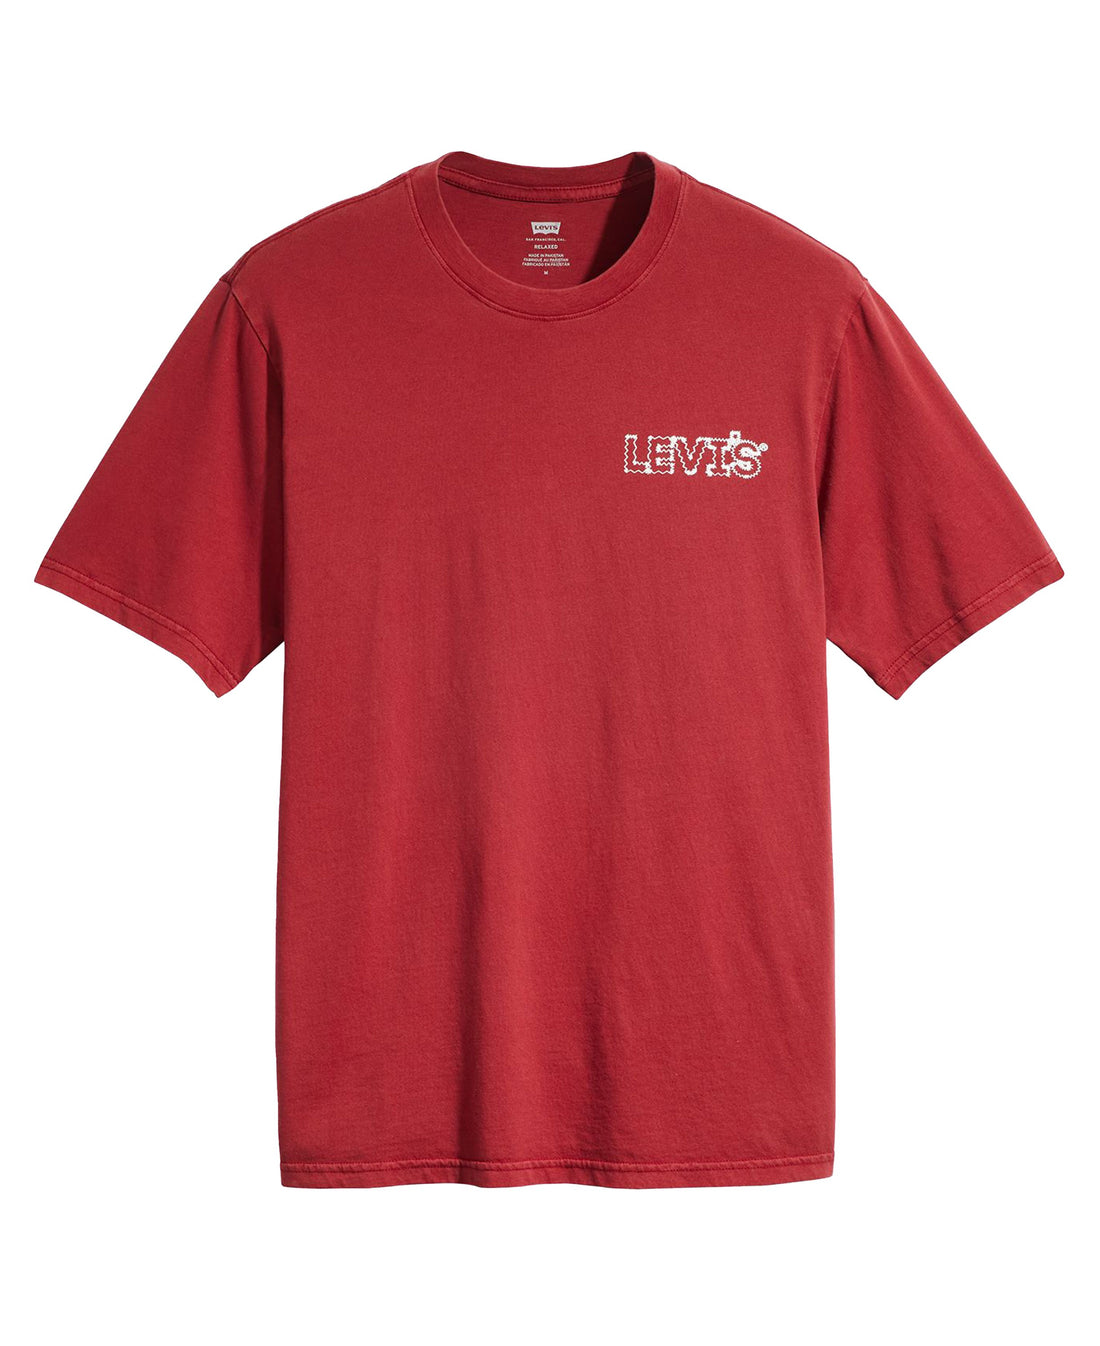 Relaxed Fit Short Sleeve T-Shirt - Sundried Tomato